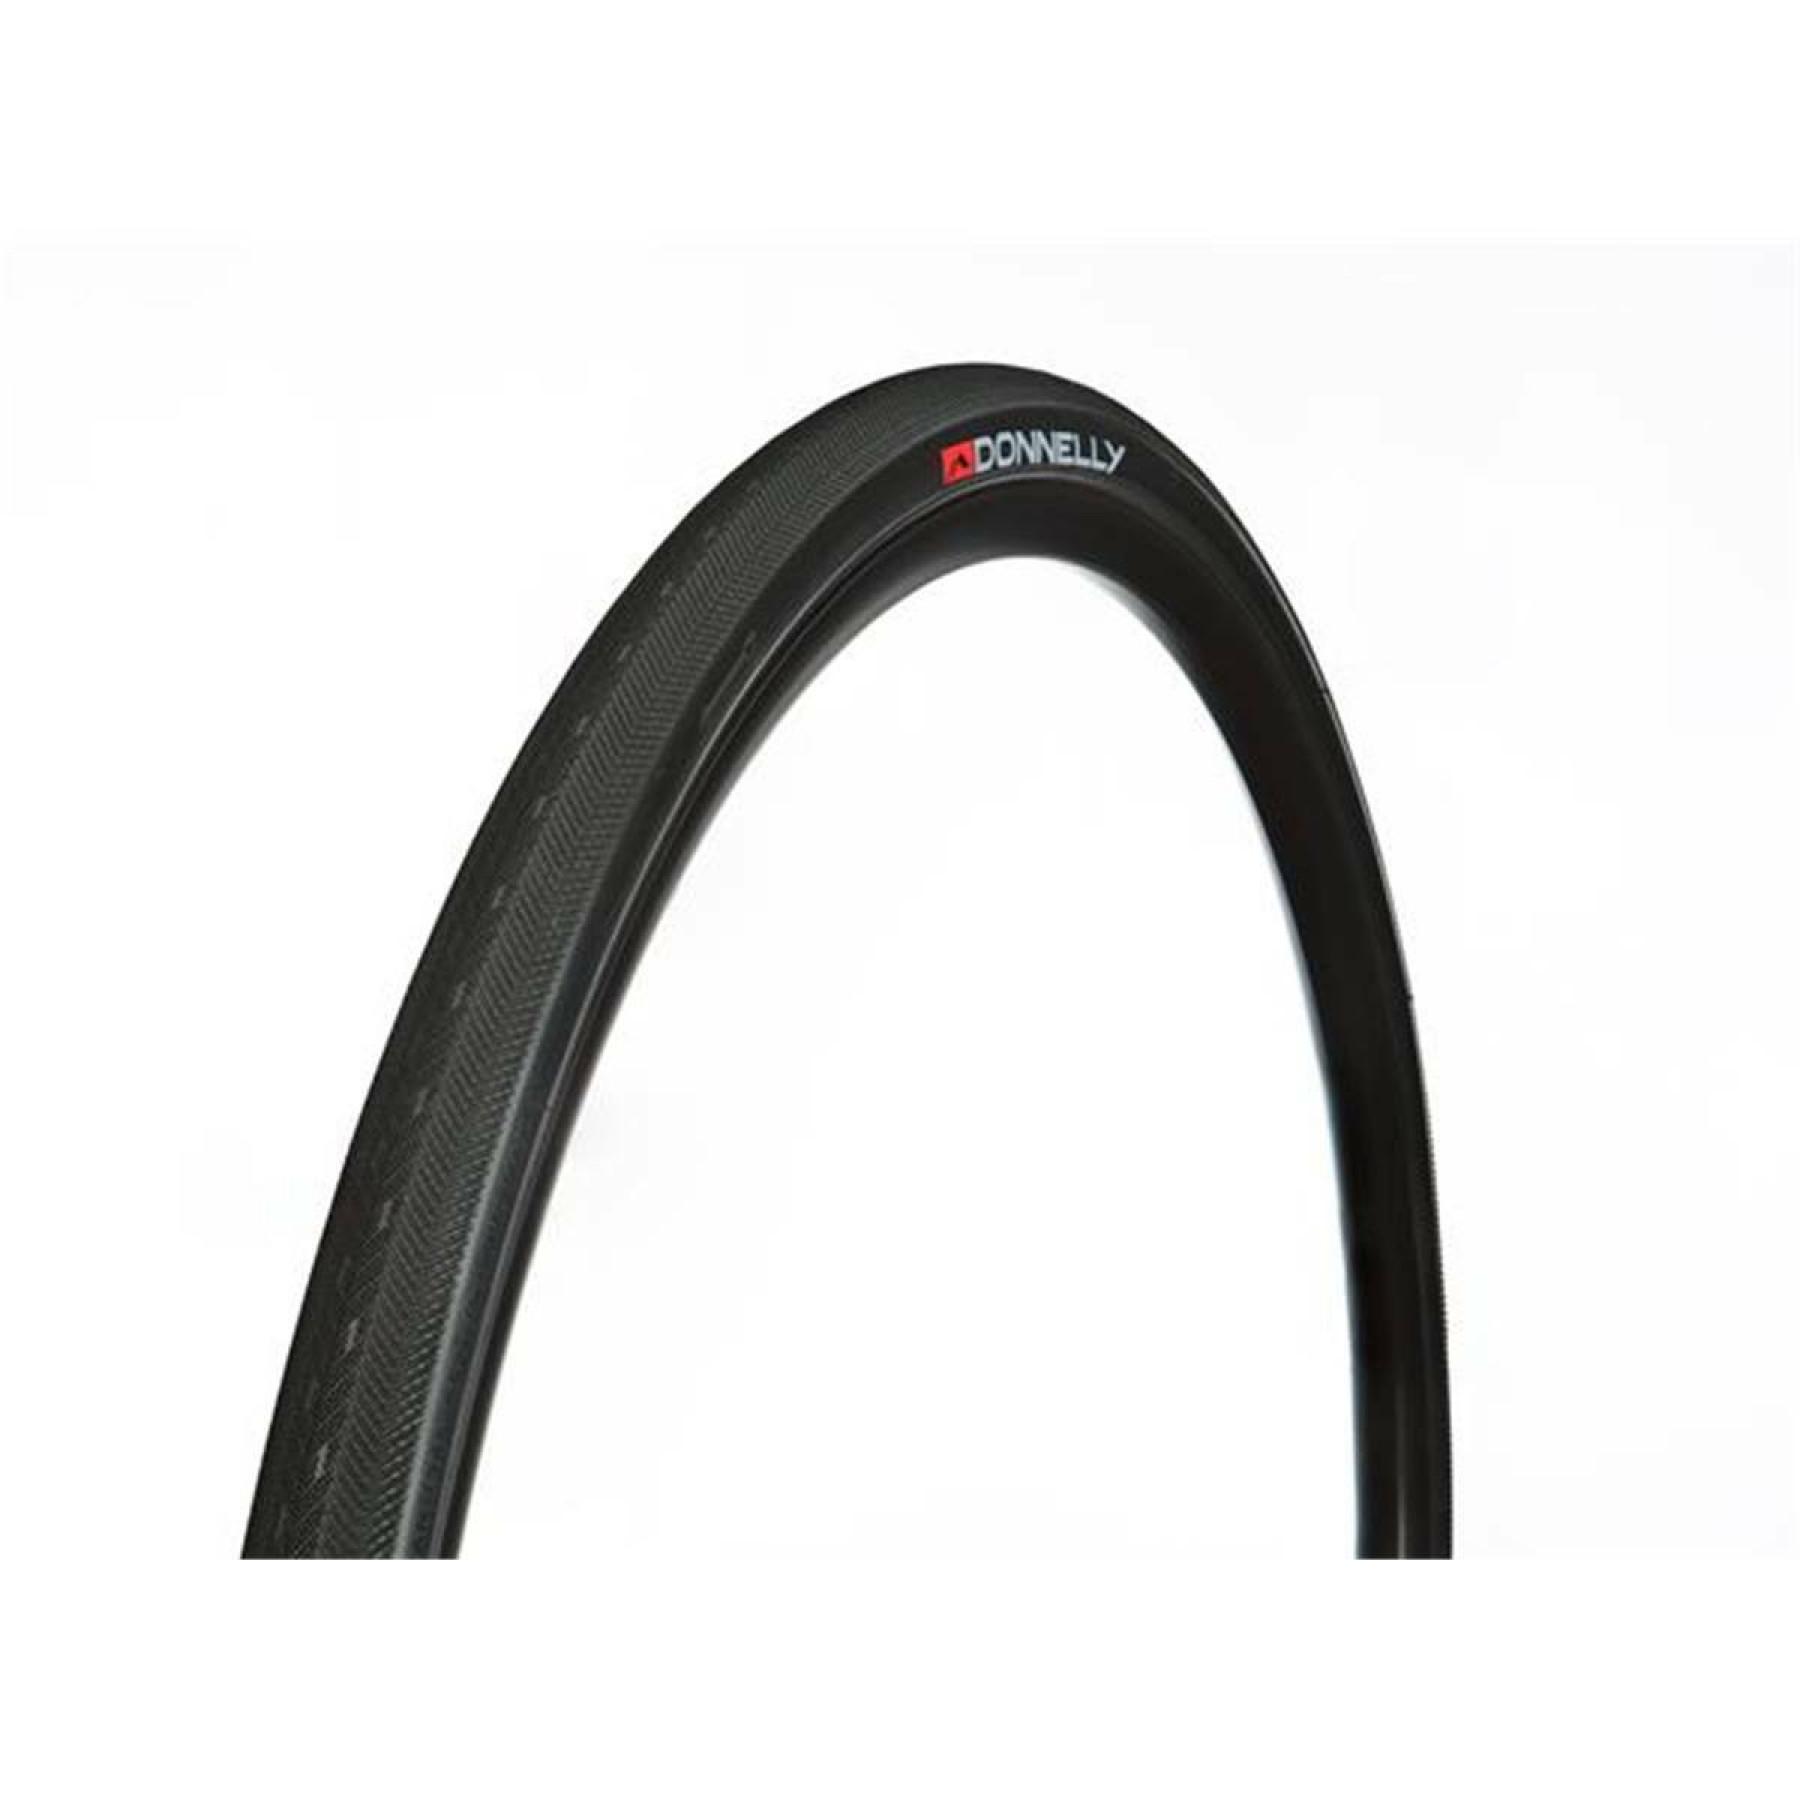 Pneumatico tubeless Donnelly ADV X'Plor CDG 700X30